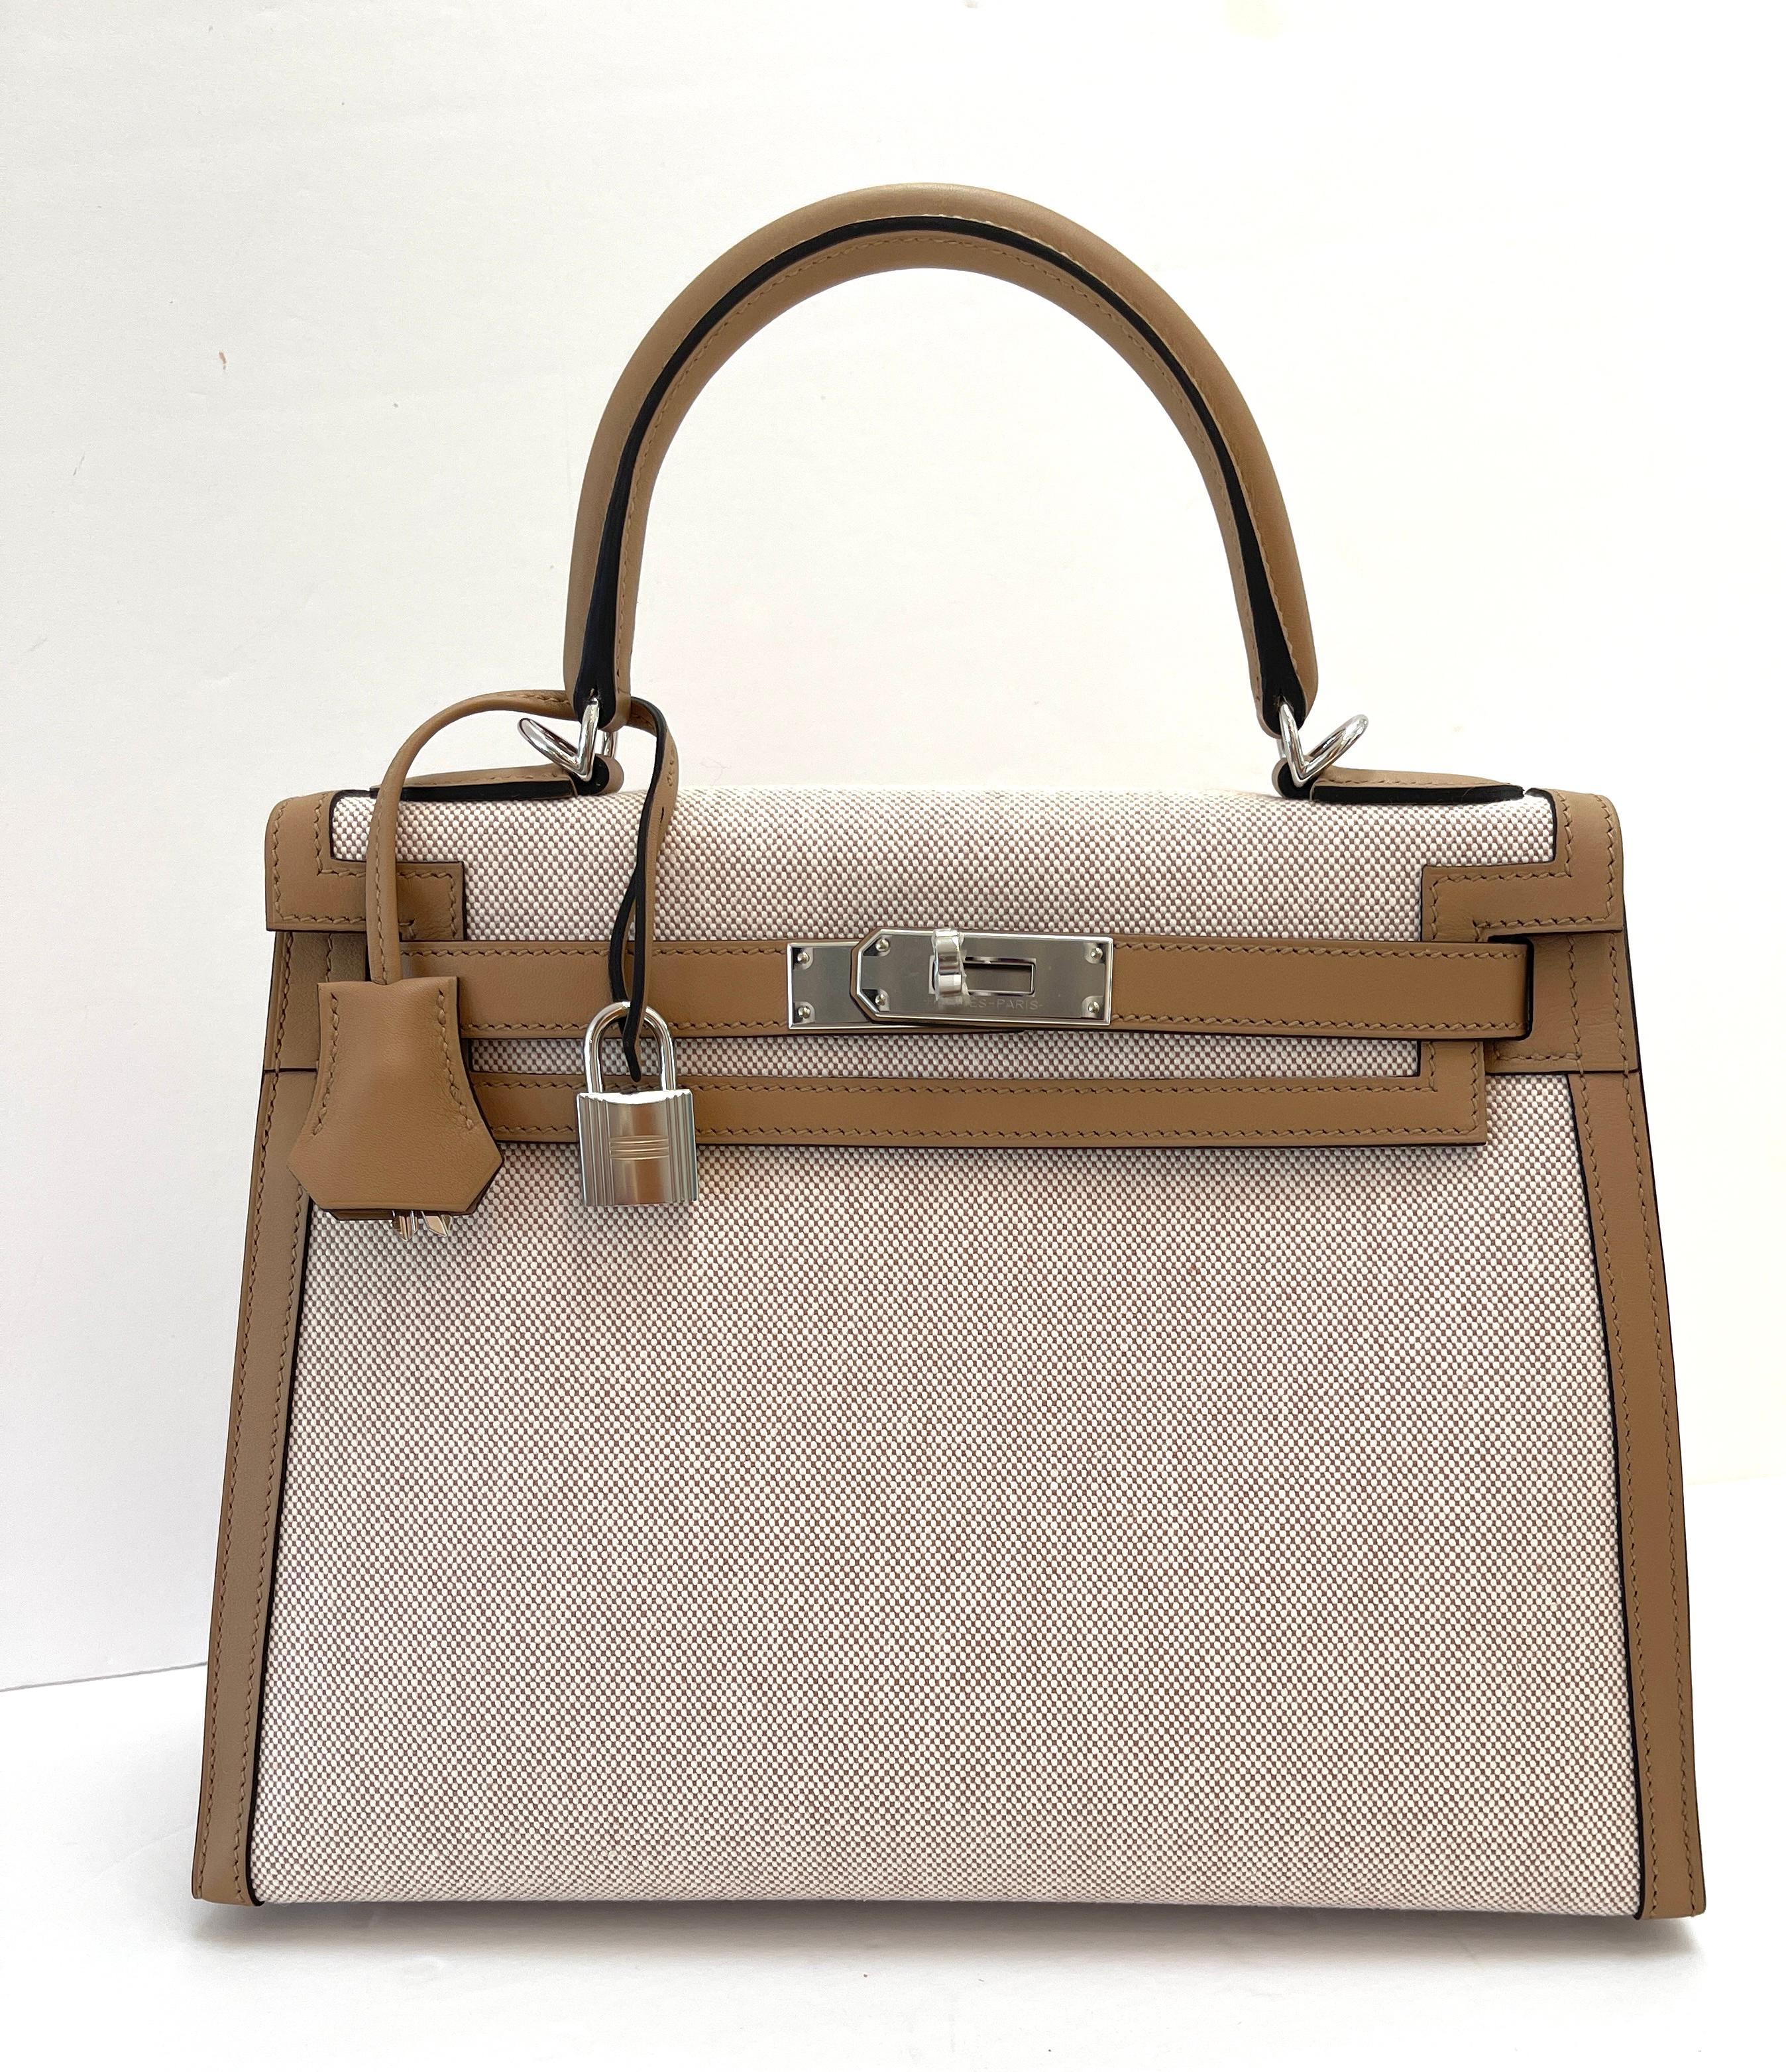 This Sellier Kelly is of Chai toile and swift leather with palladium hardware and features tonal stitching, front flap, two straps with center toggle closure, clochette with lock and two keys, single rolled handle and removable leather shoulder